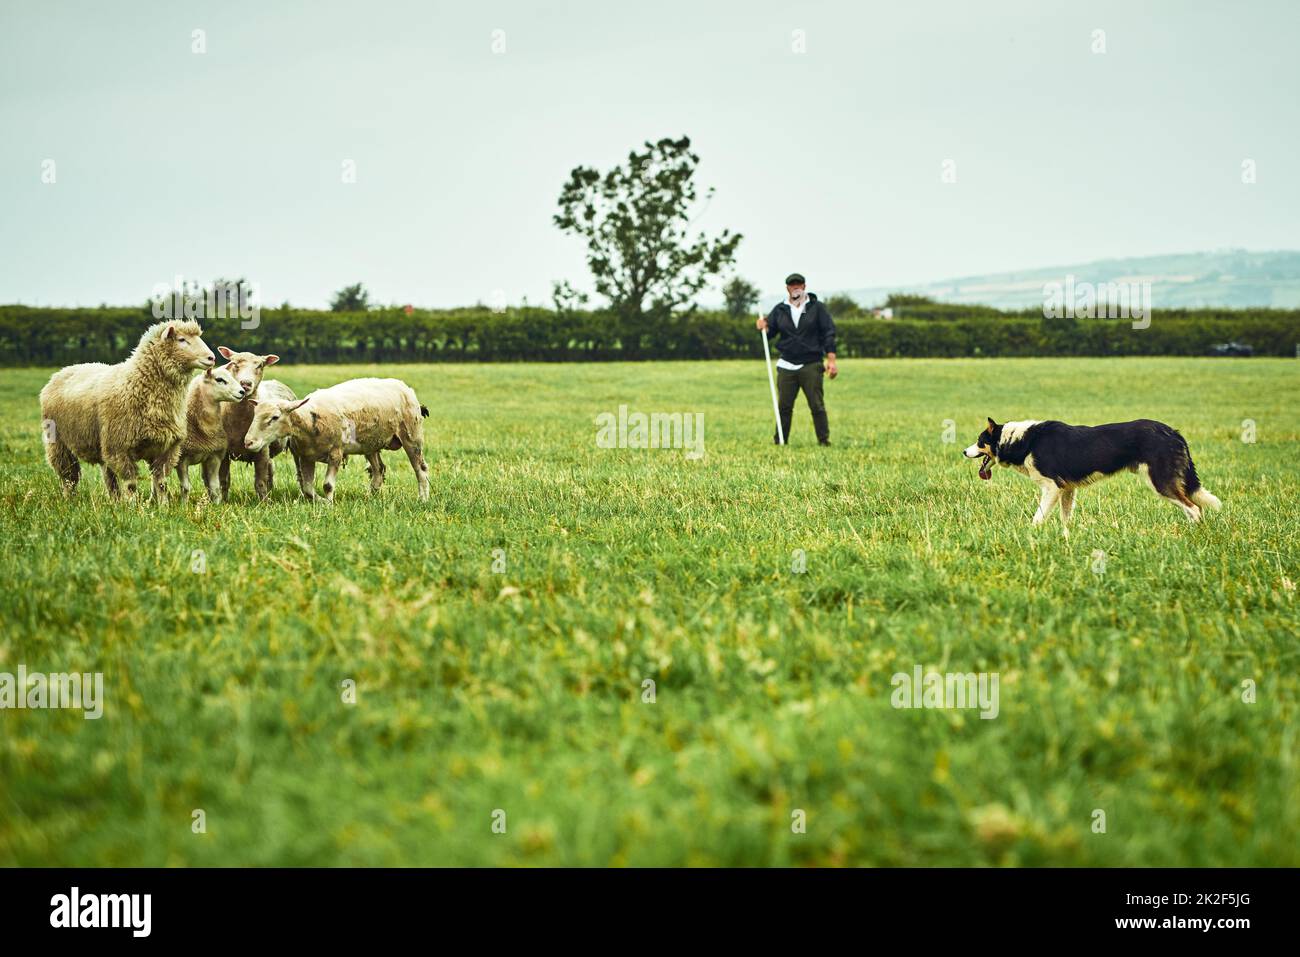 Its a face off. Wide shot of a focused young farmer looking at his dog facing off with tree sheep on a open green field on a farm. Stock Photo